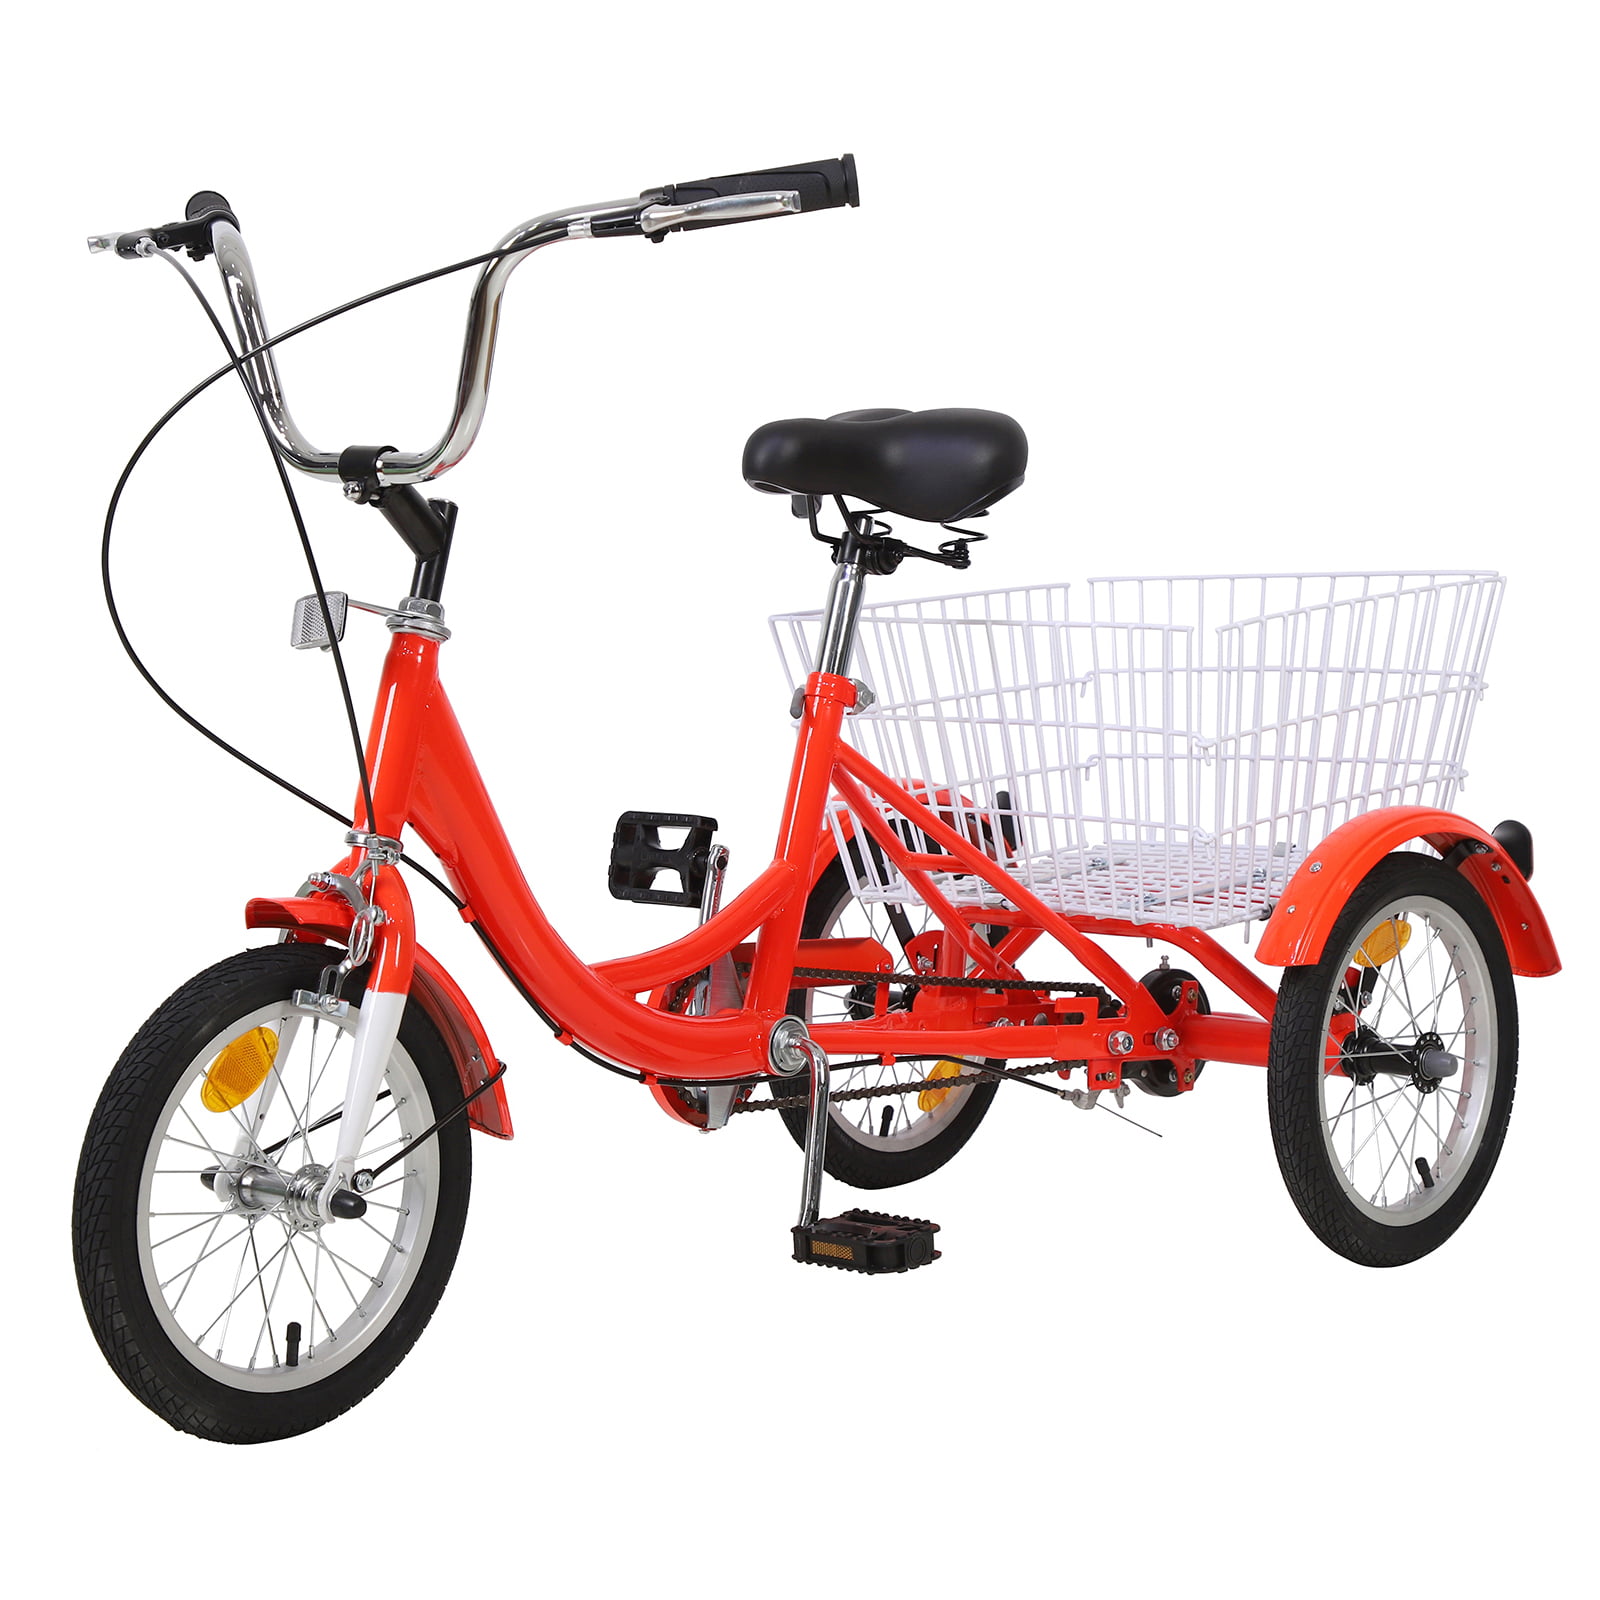 Slsy 14 inch Tricycle Single Speed 14 inch 3 Wheel Bikes 14” Trike Bike Perfect for Beginner Riders Three-Wheeled Bicycles with Adjustable Height